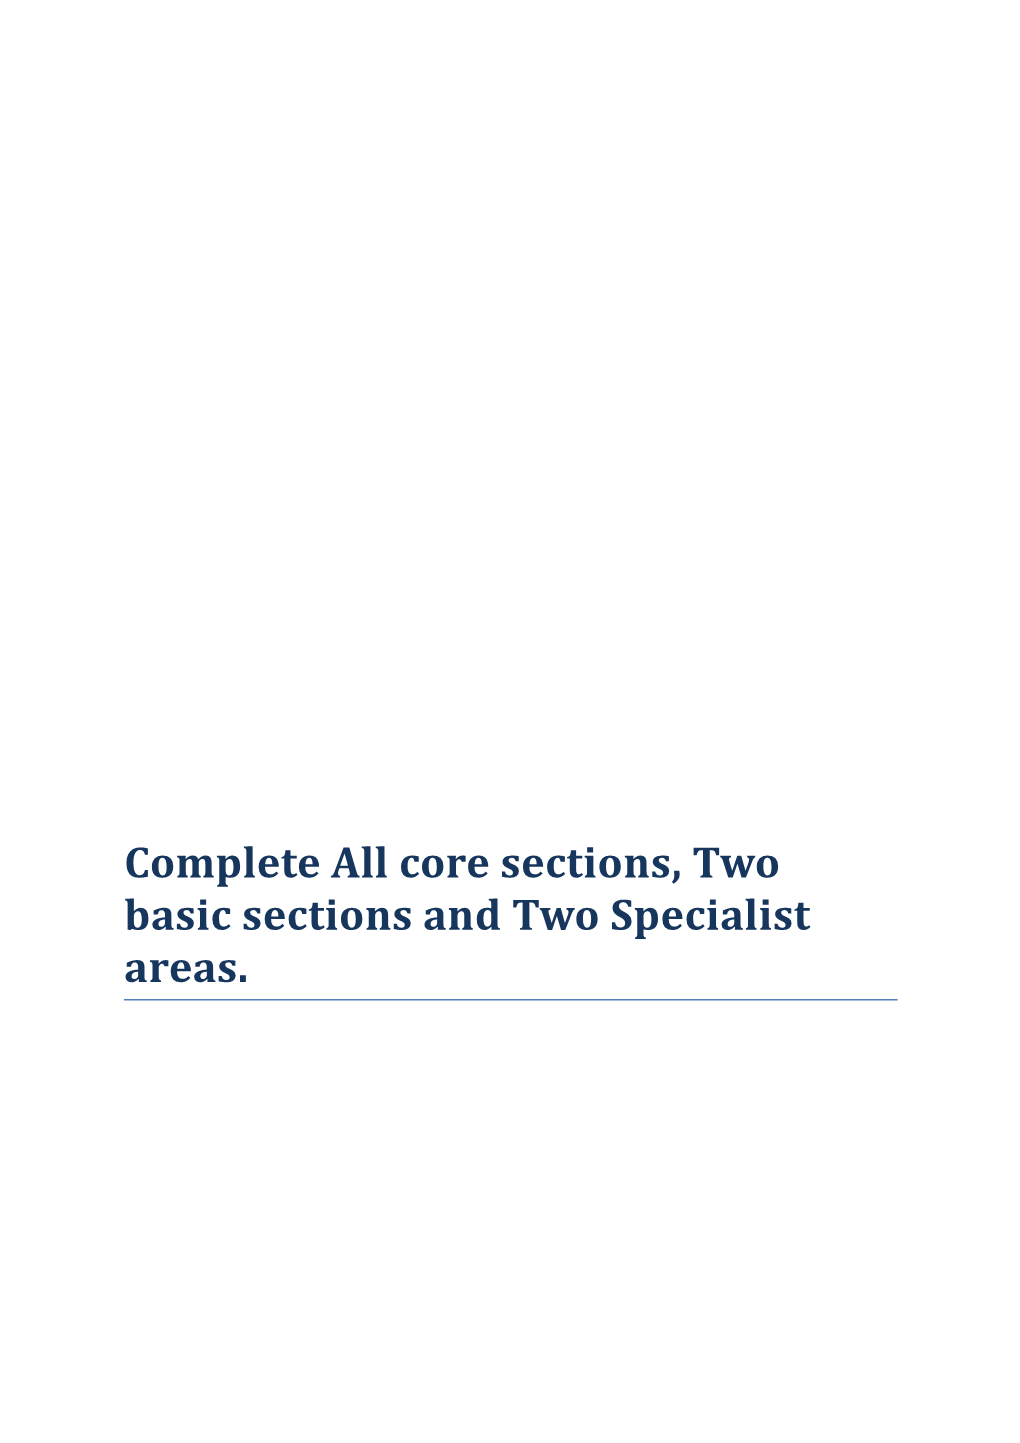 Complete All Core Sections, Two Basic Sections and Two Specialist Areas